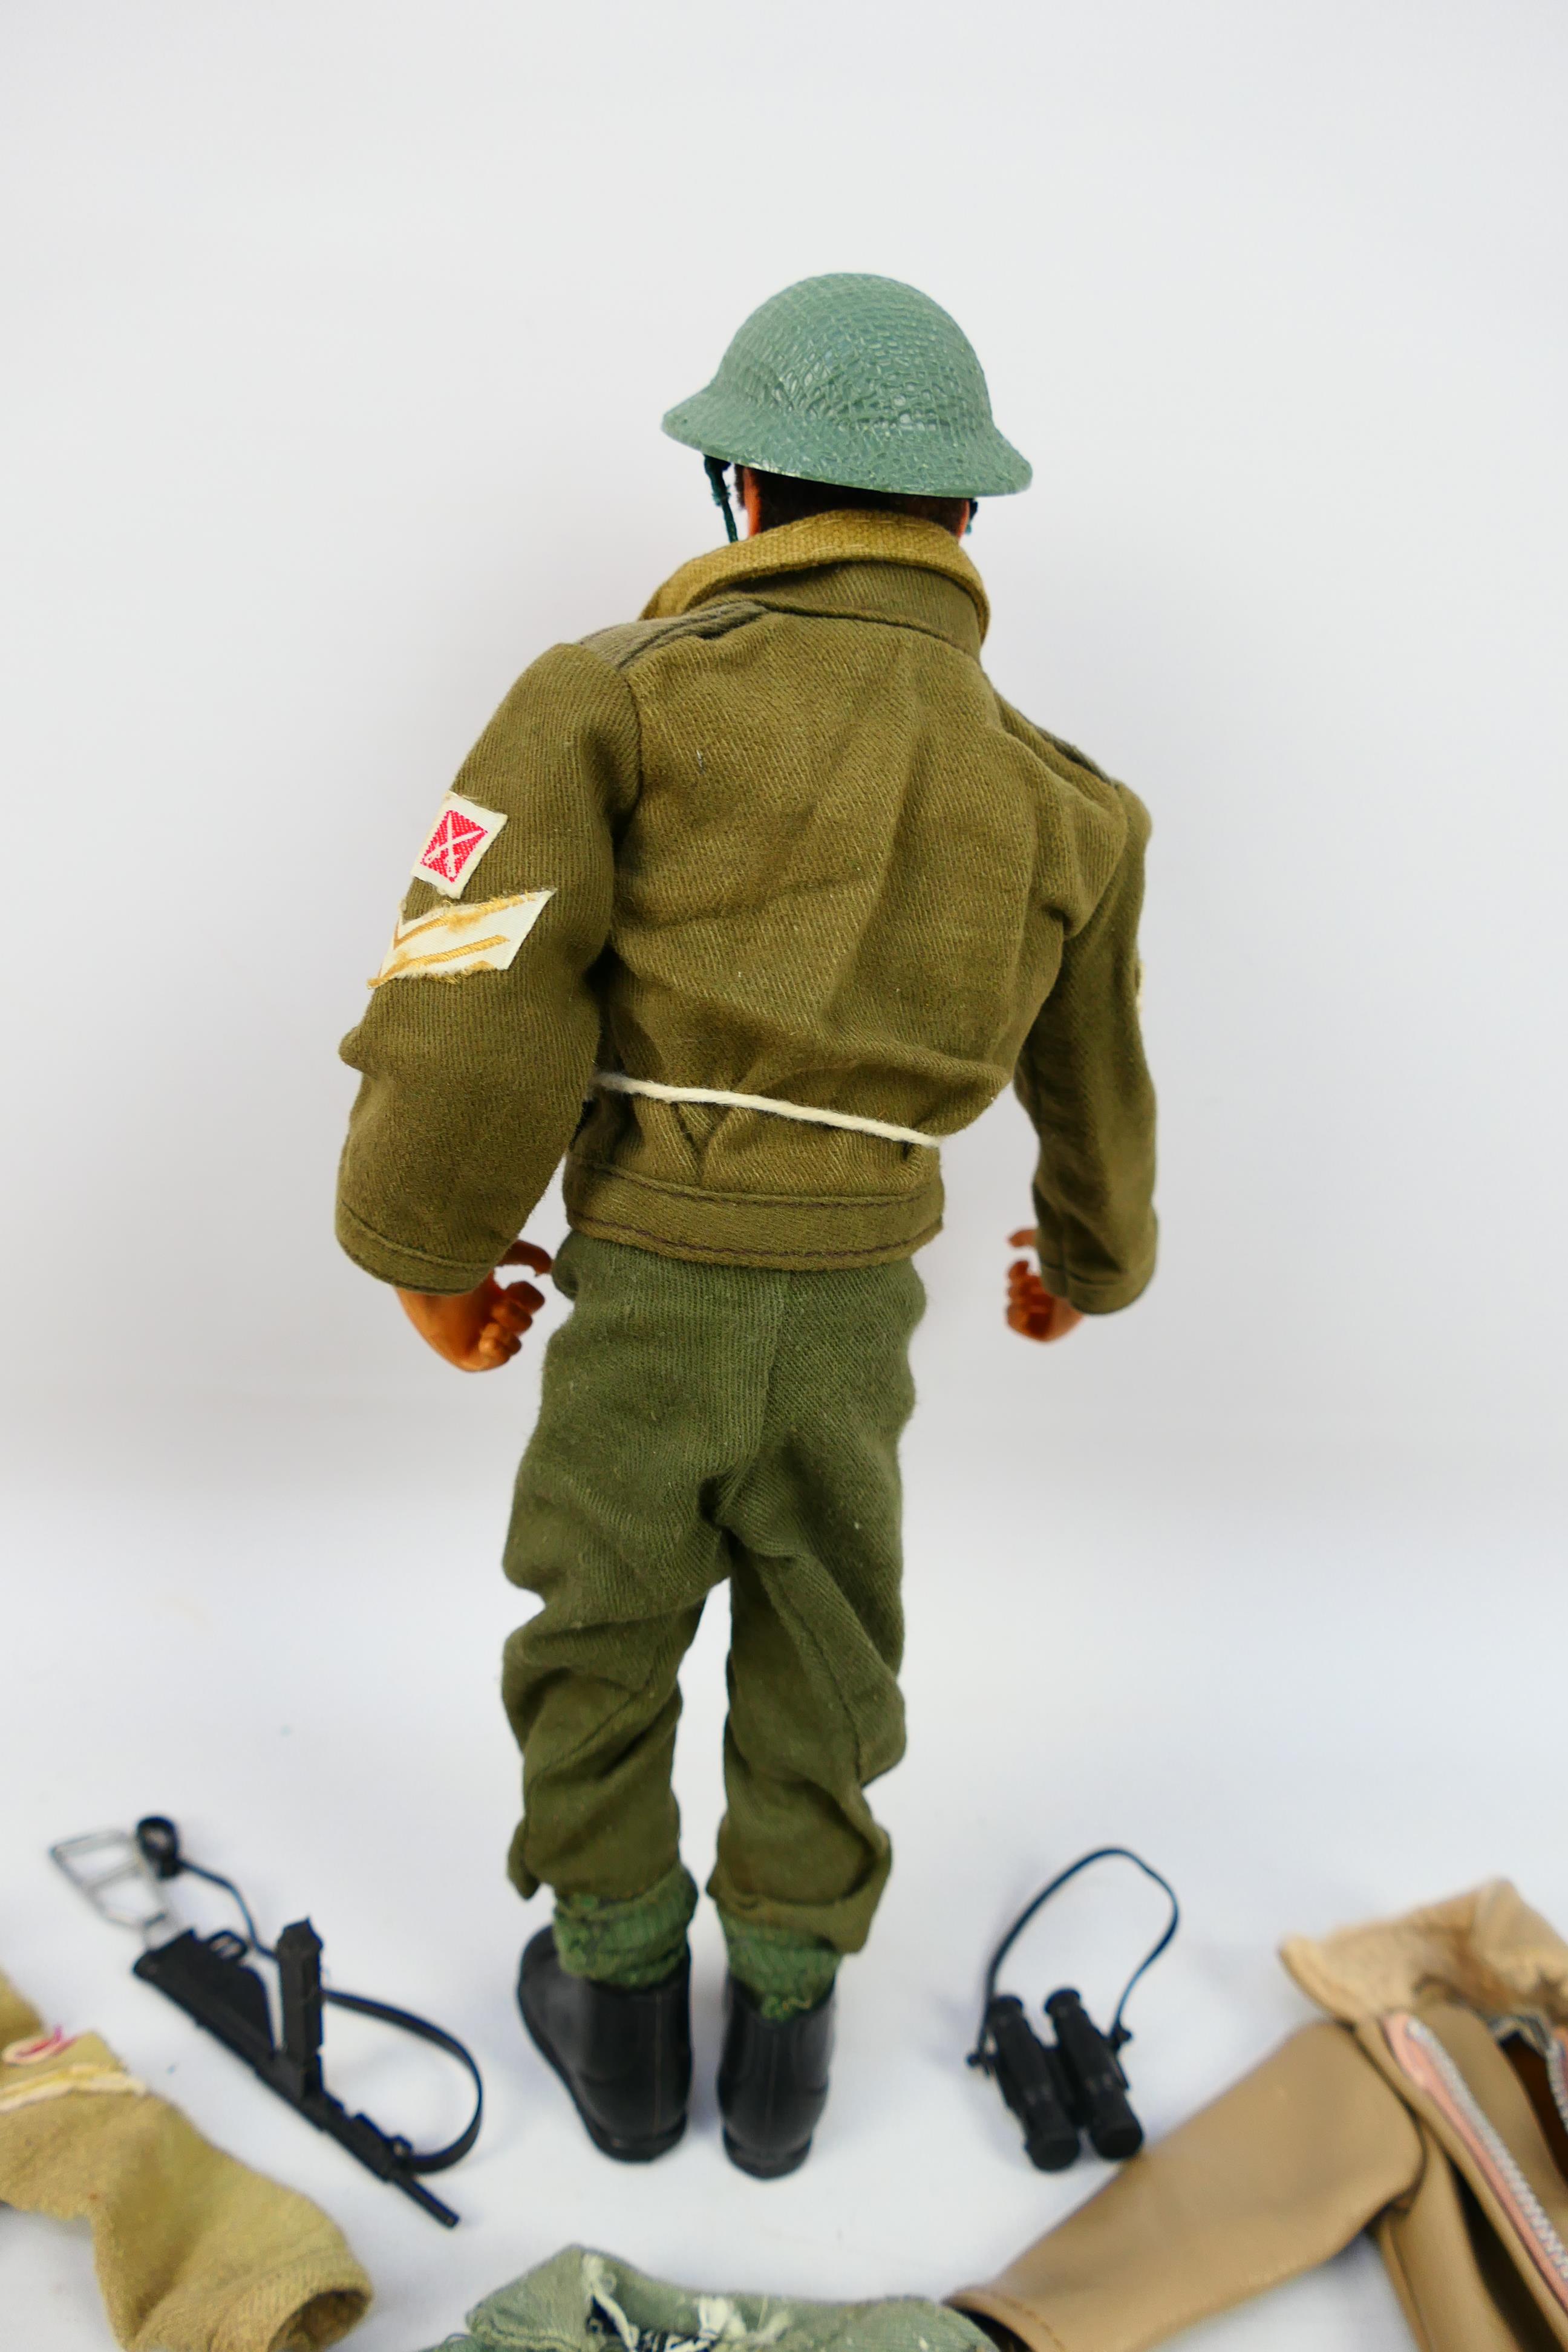 Palitoy - Action Man - A 1978 Action Man action figure with Flock hair and eagle eyes in a British - Image 9 of 16